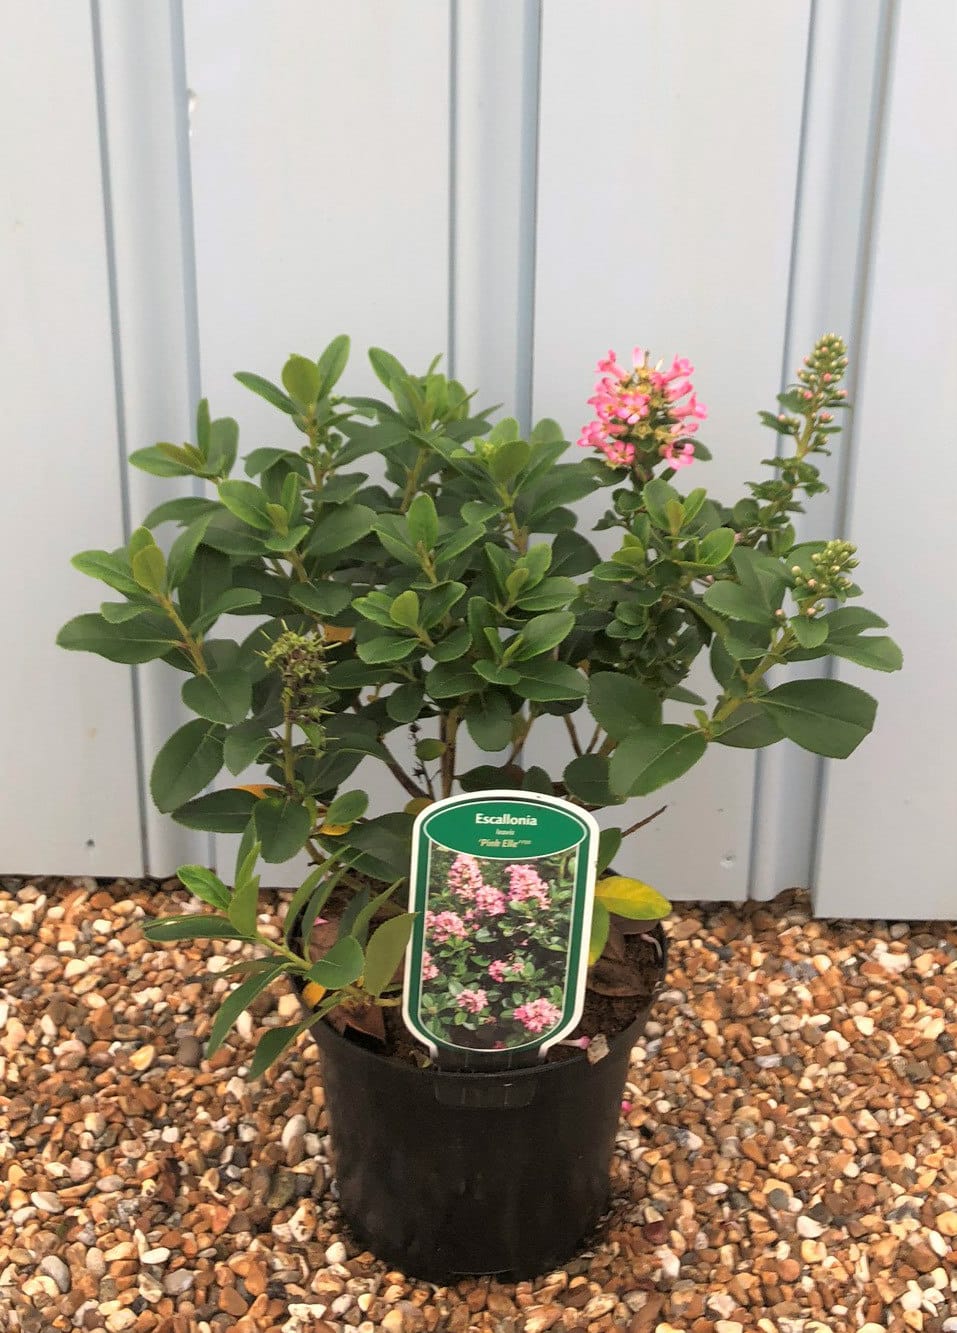 Evergreen 1 x 3-Litre Potted Plant by Suttons Pink Flowers Escallonia laevis 'Pink Elle' Hardy Shrub Ideal for Coastal Gardens Low Maintenance 